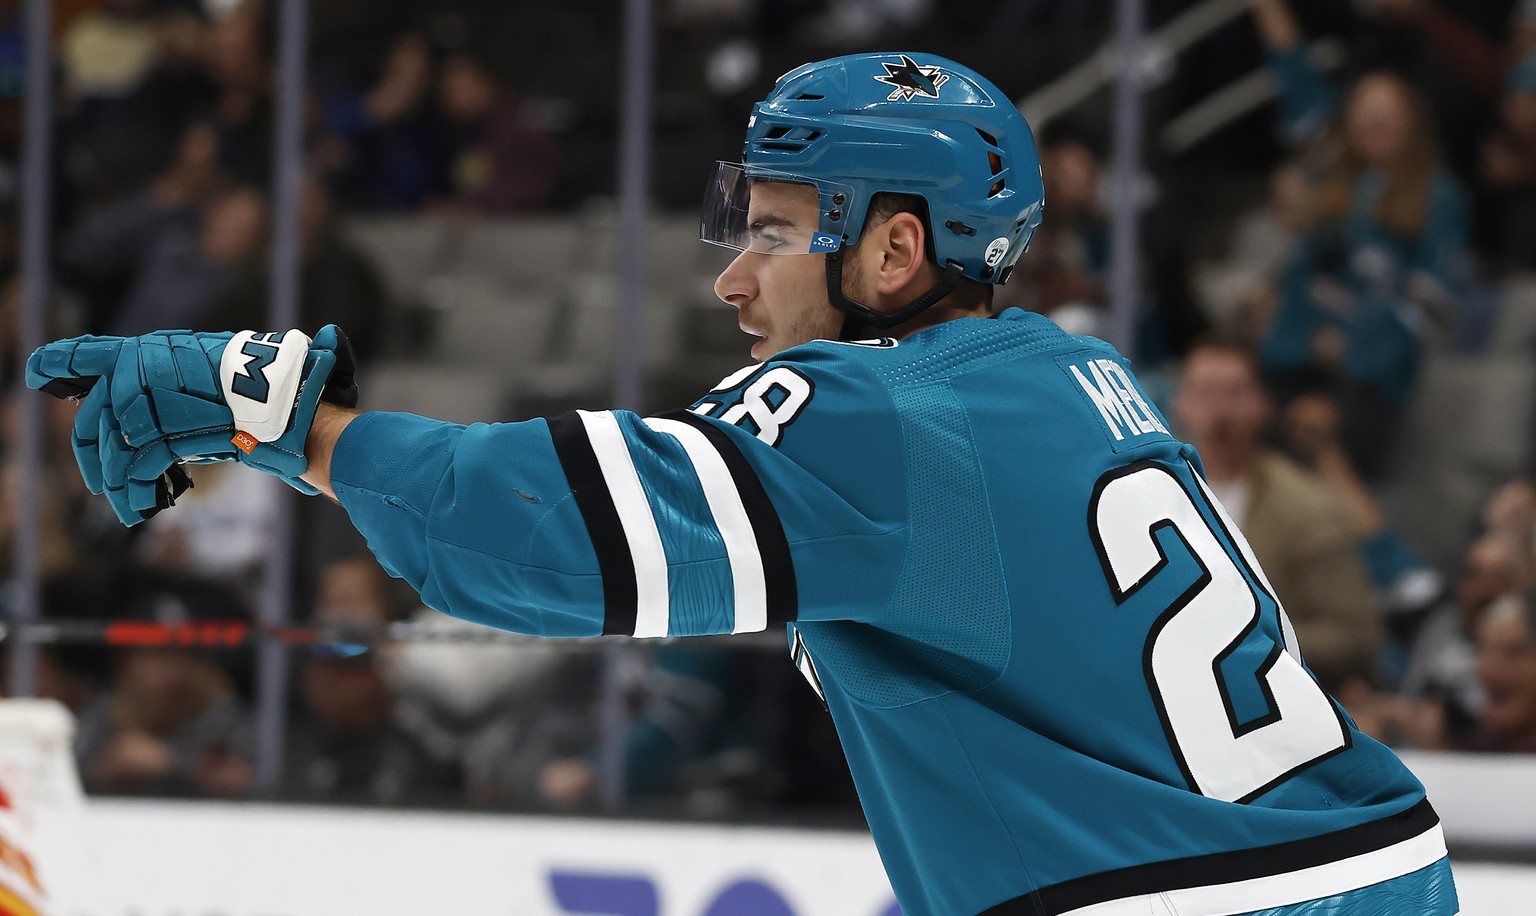 San Jose Sharks right wing Timo Meier (28) celebrates after scoring a goal in the first period of an NHL hockey game against the Calgary Flames, Sunday, Dec. 18, 2022, in San Jose, Calif.(AP Photo/Jos ...